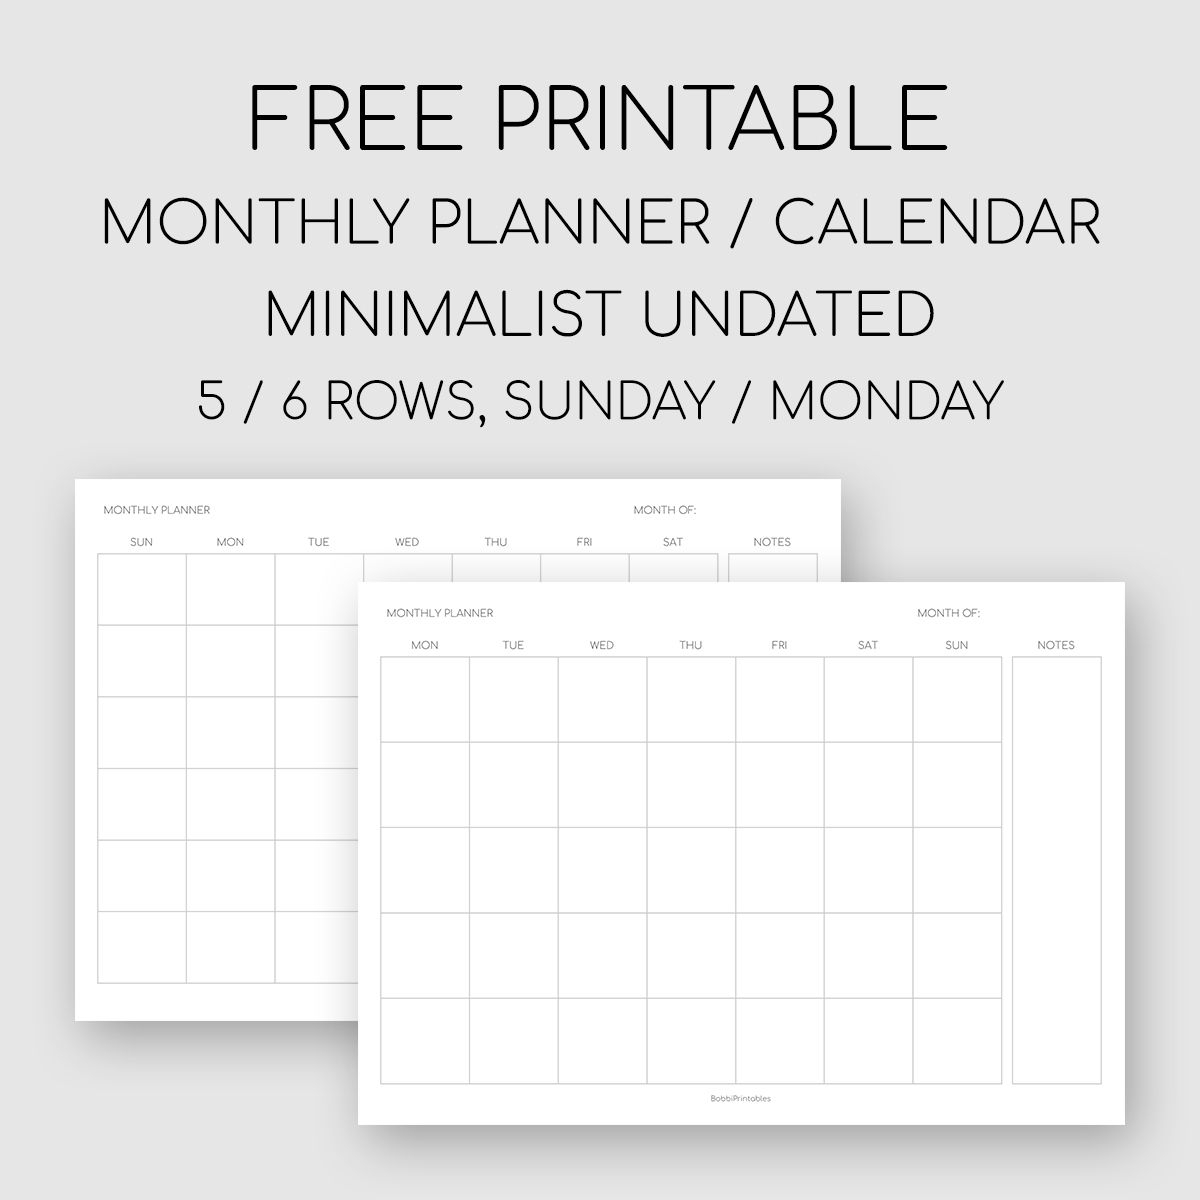 Free Printable Undated Monthly Calendar In 2020 | Monthly